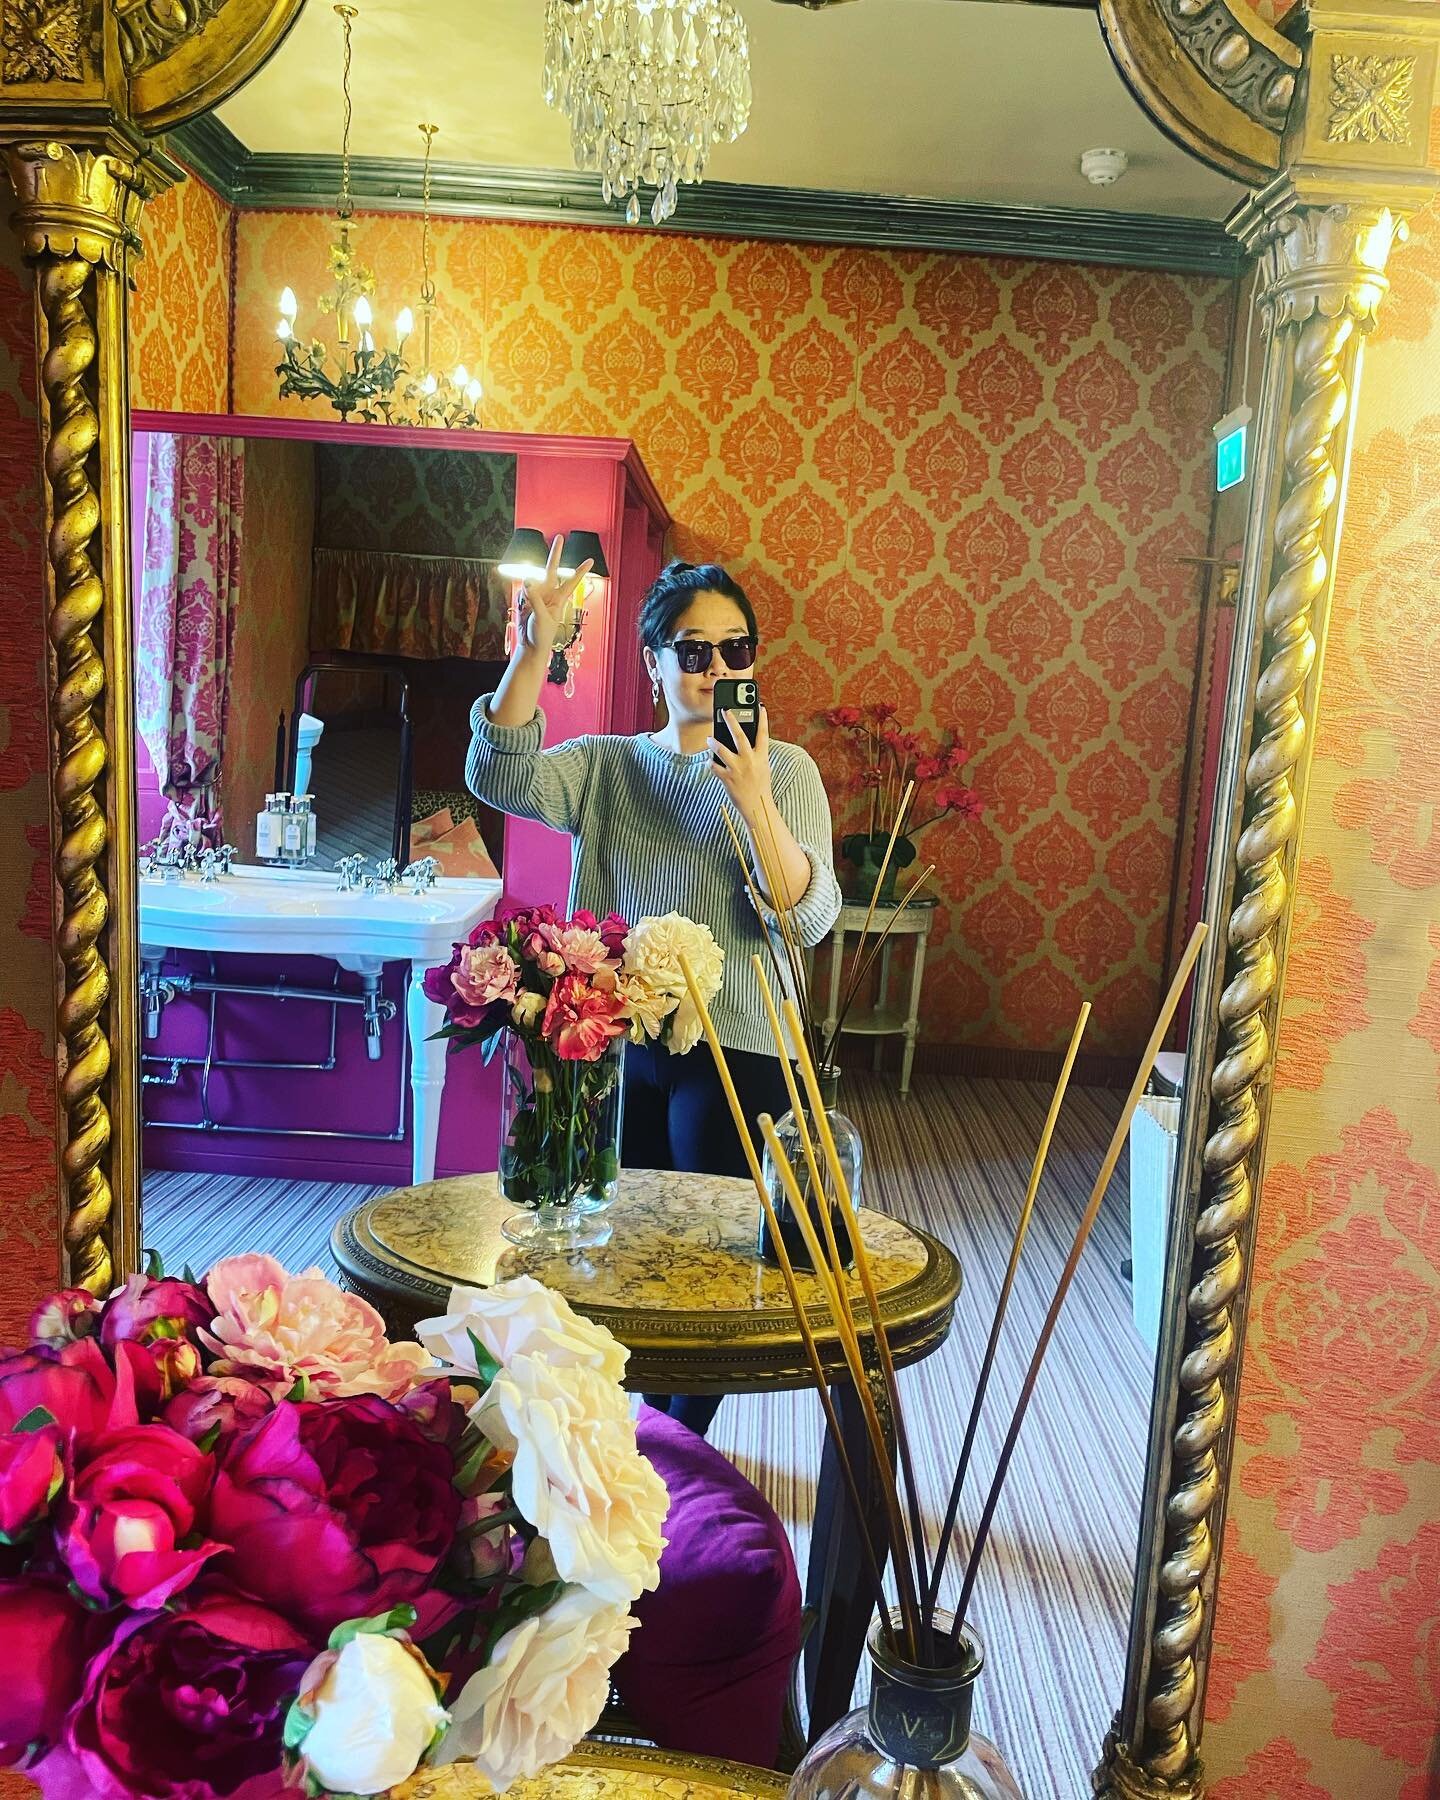 Welcome to Bougie Town! Went full goblin mode after finding this stunning bathroom with a whole bunch of mirrors. A carpeted bathroom though?? 🤔 
✨✨✨
(P.s. hello! It&rsquo;s my face✨)